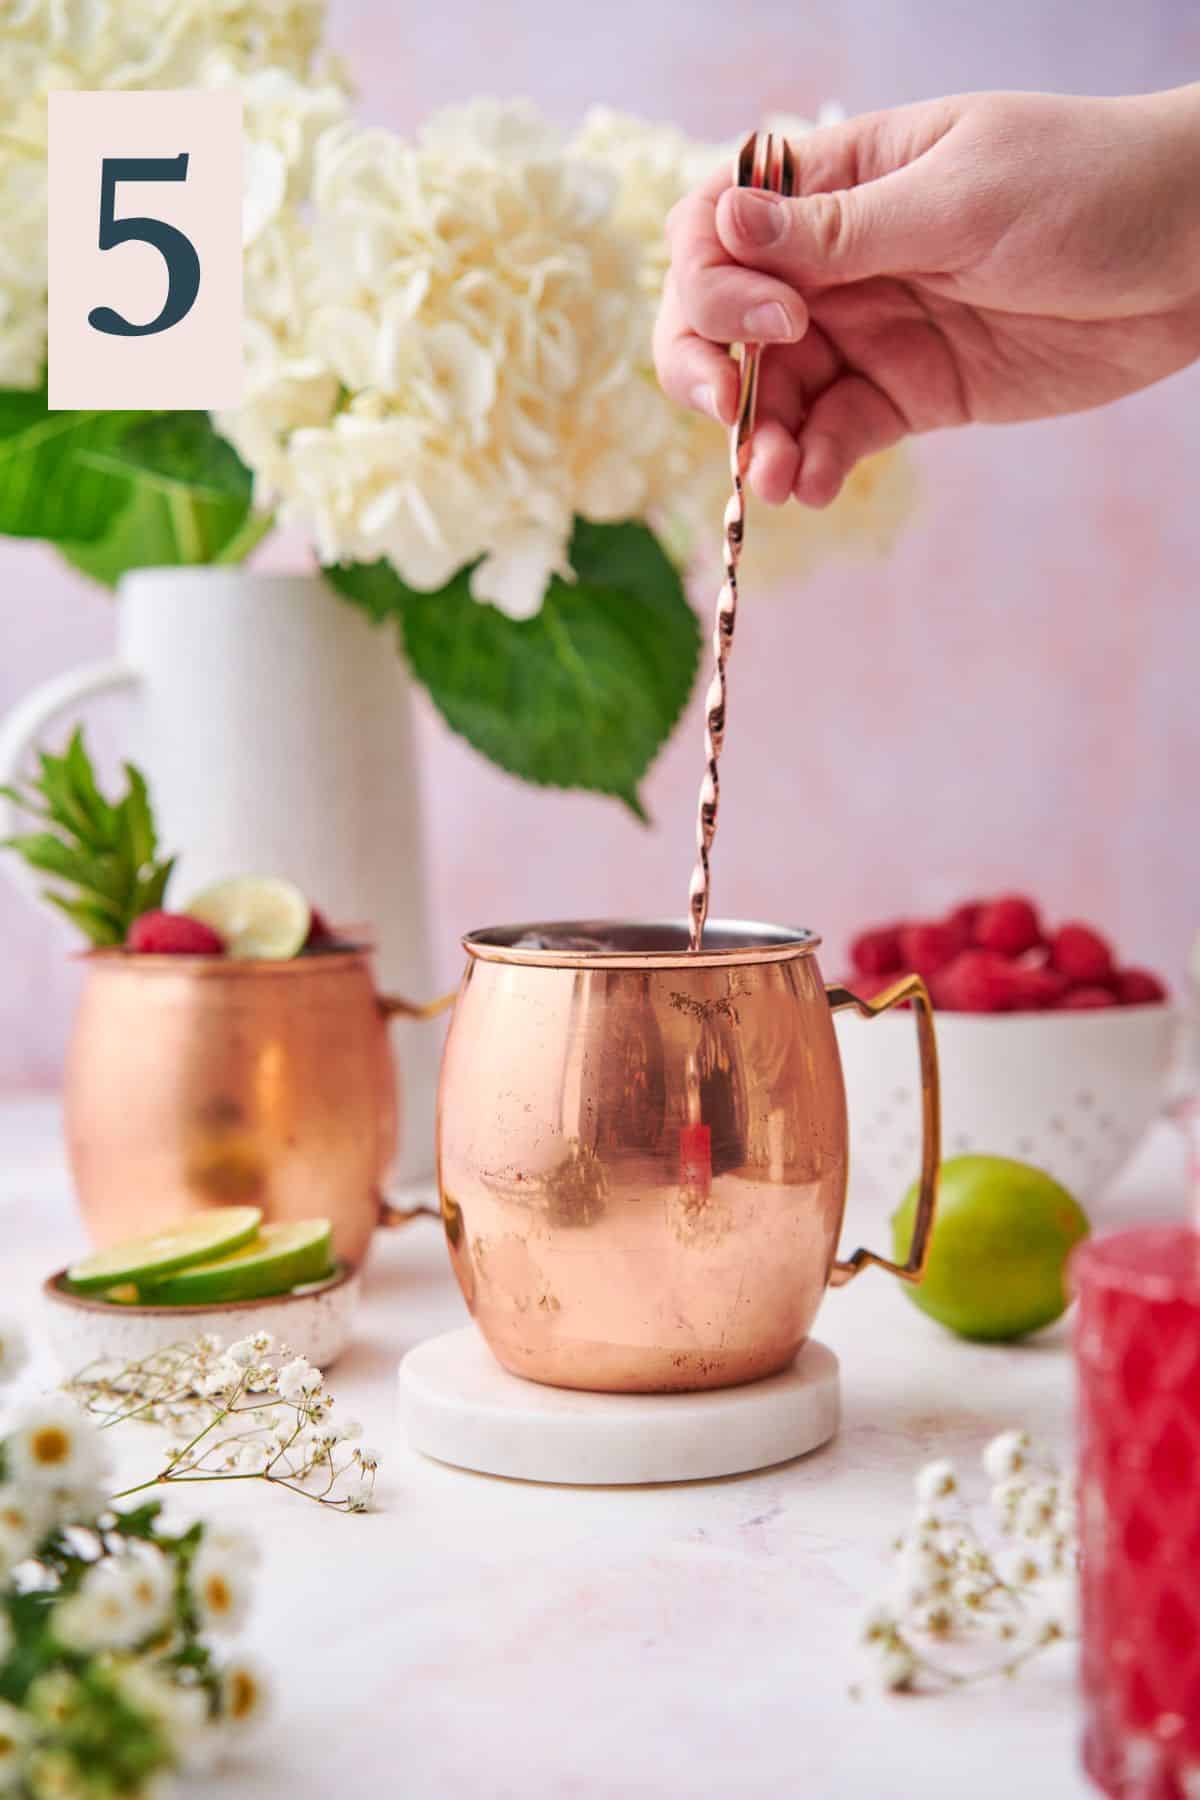 hand stirring a cocktail in a copper moscow mule mug with fresh raspberries, hydrangeas, and other small white flowers.  